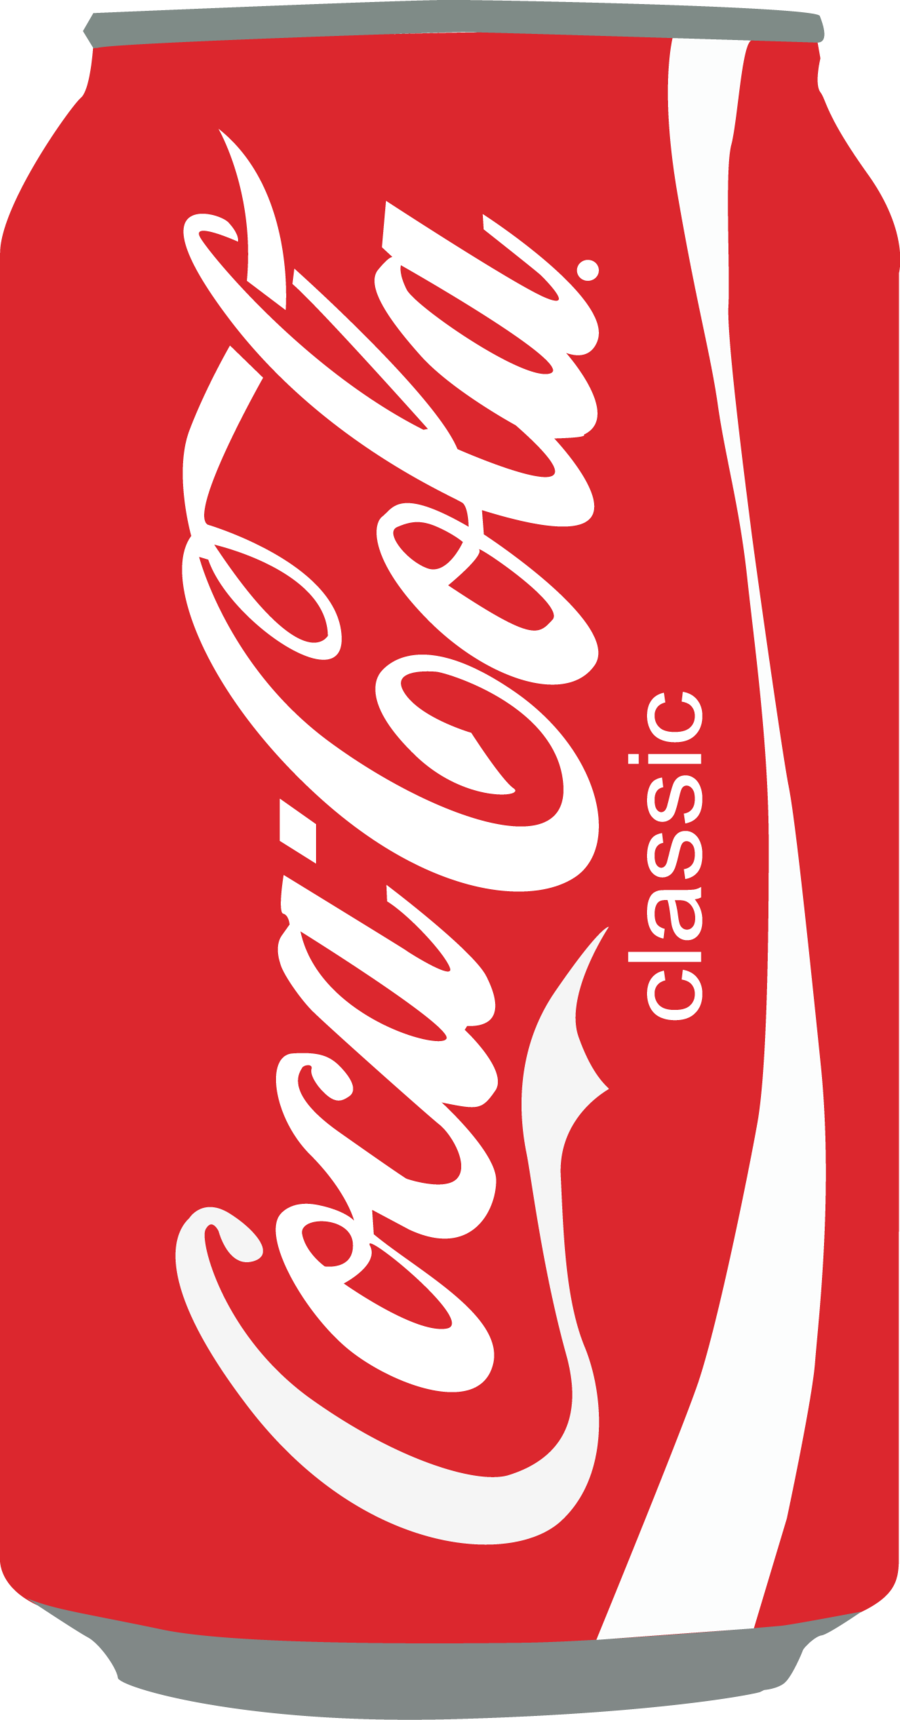 Soda clipart free images image.